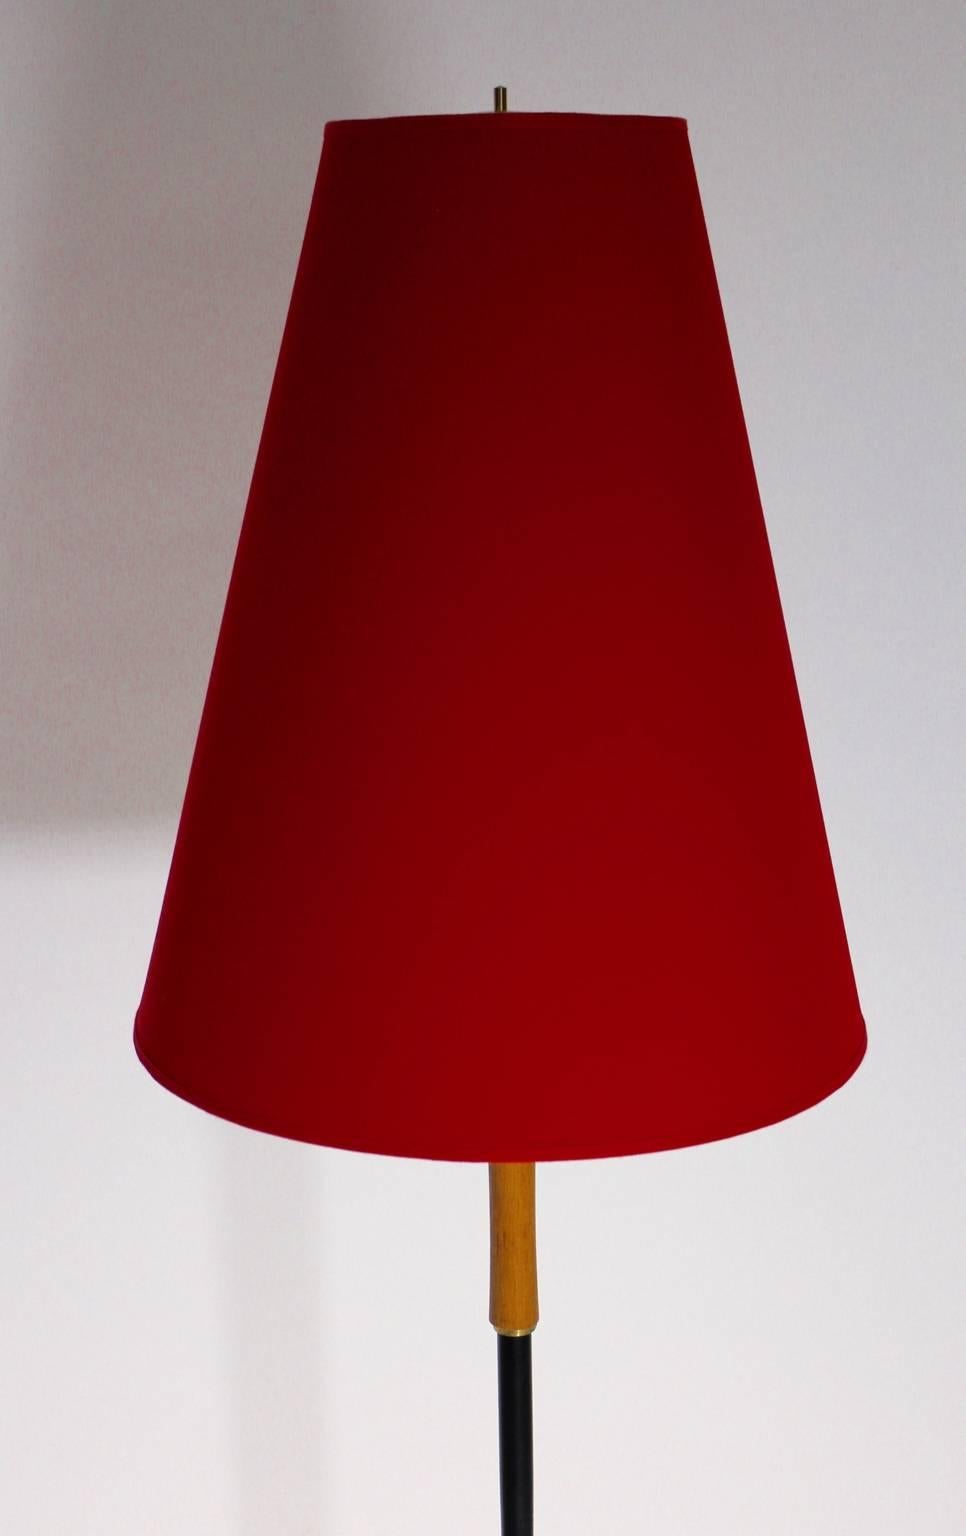  Mid Century Modern Red Black Vintage Tripod Floor Light by J. T. Kalmar 1950s In Good Condition For Sale In Vienna, AT